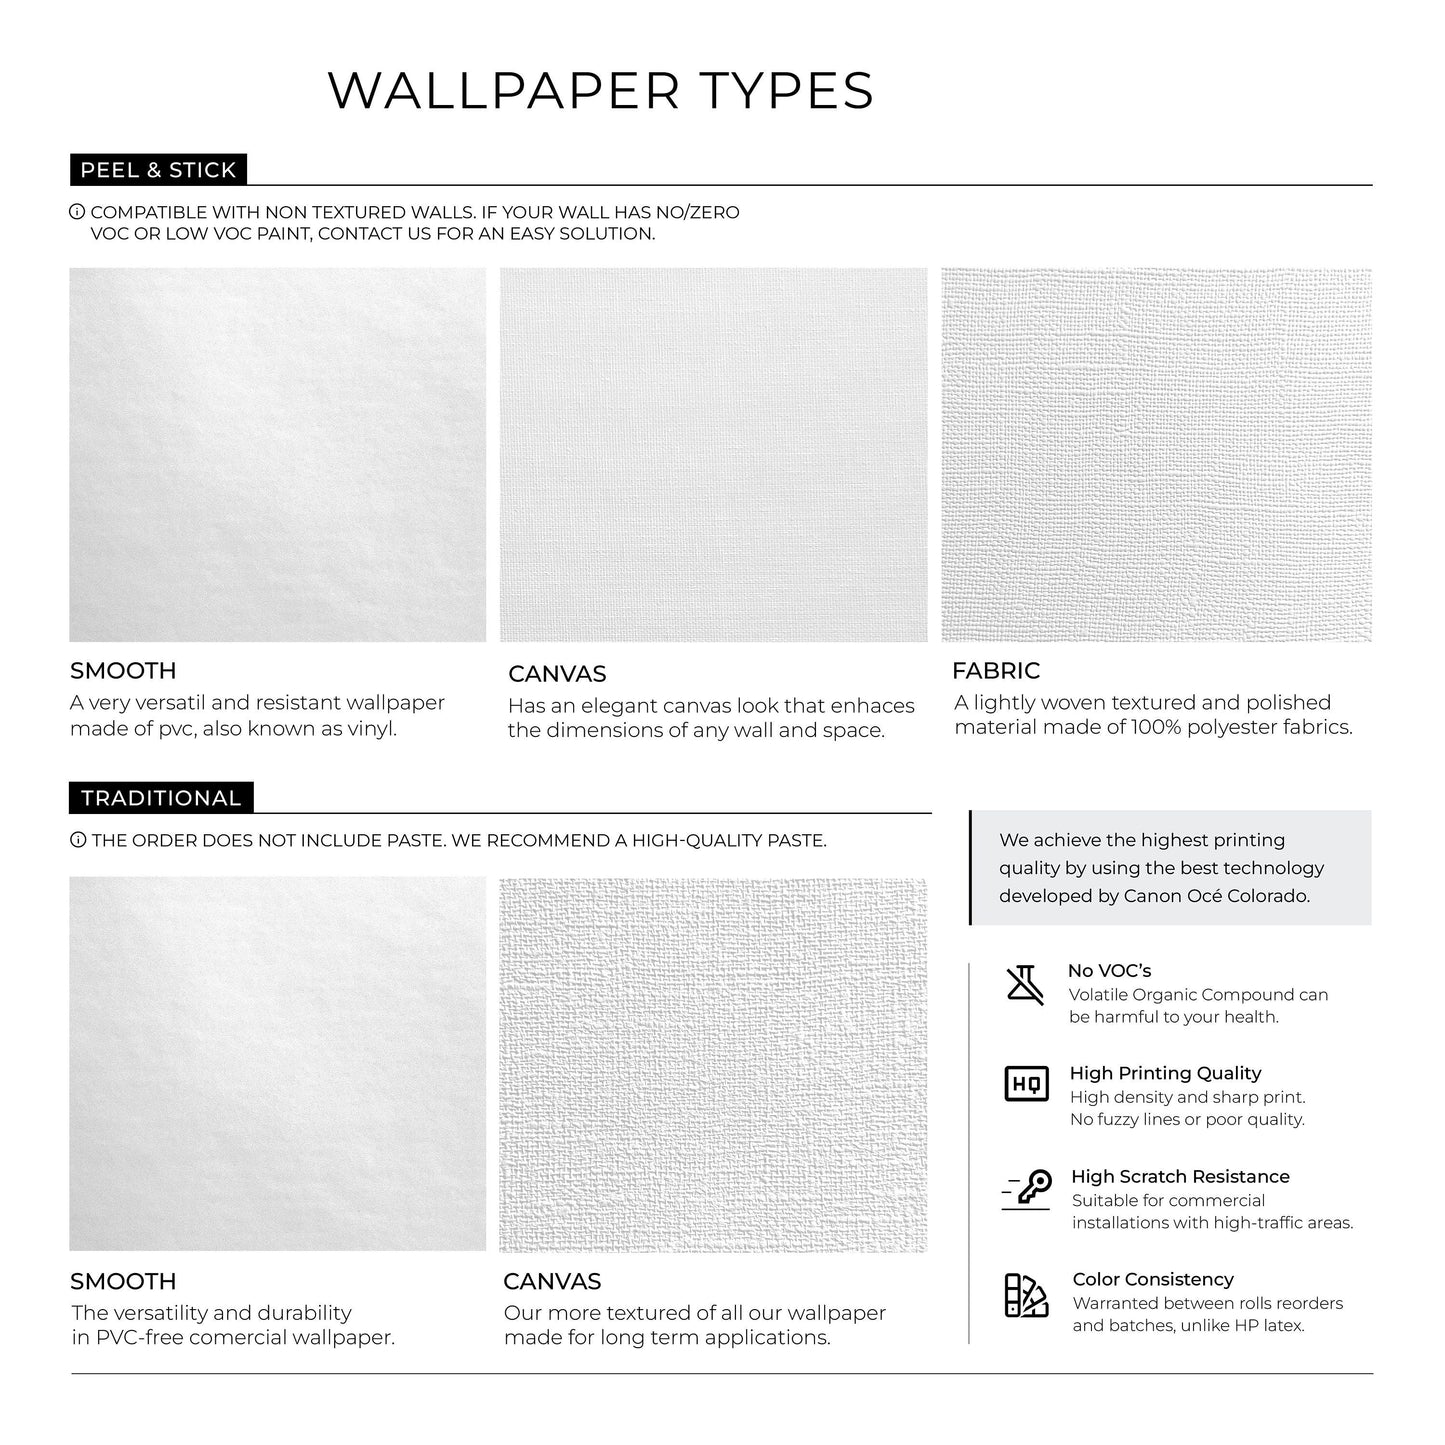 Philippine Gray Wallpaper / Solid Color / Peel and Stick Wallpaper Removable Wallpaper Home Decor Wall Art Wall Decor Room Decor - D471